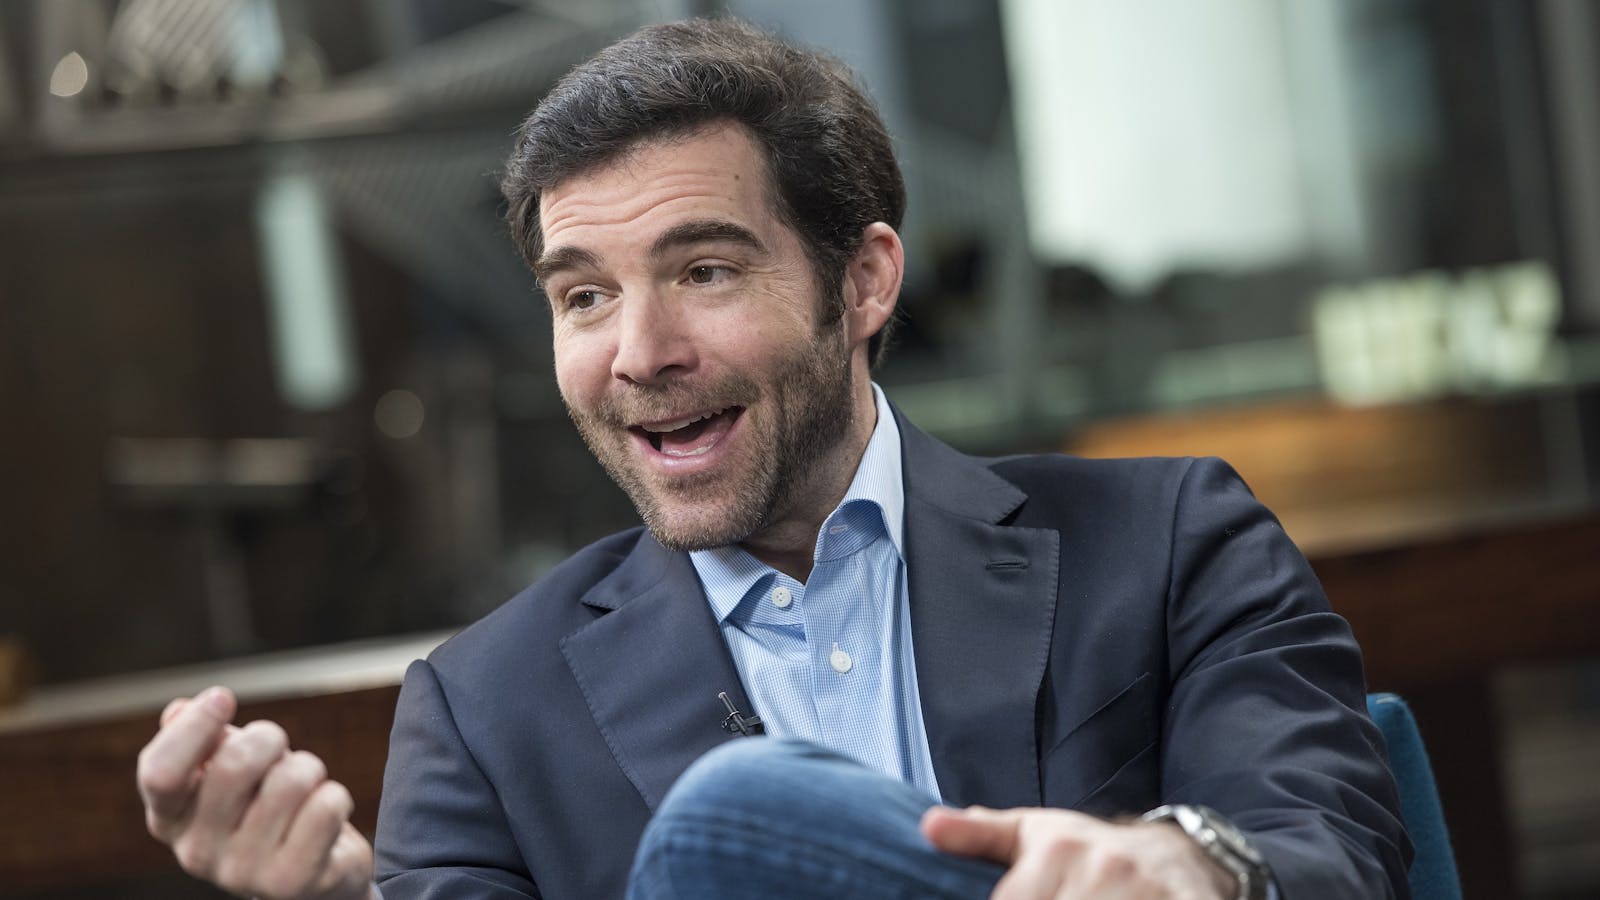 LinkedIn CEO Jeff Weiner. Photo by Bloomberg.